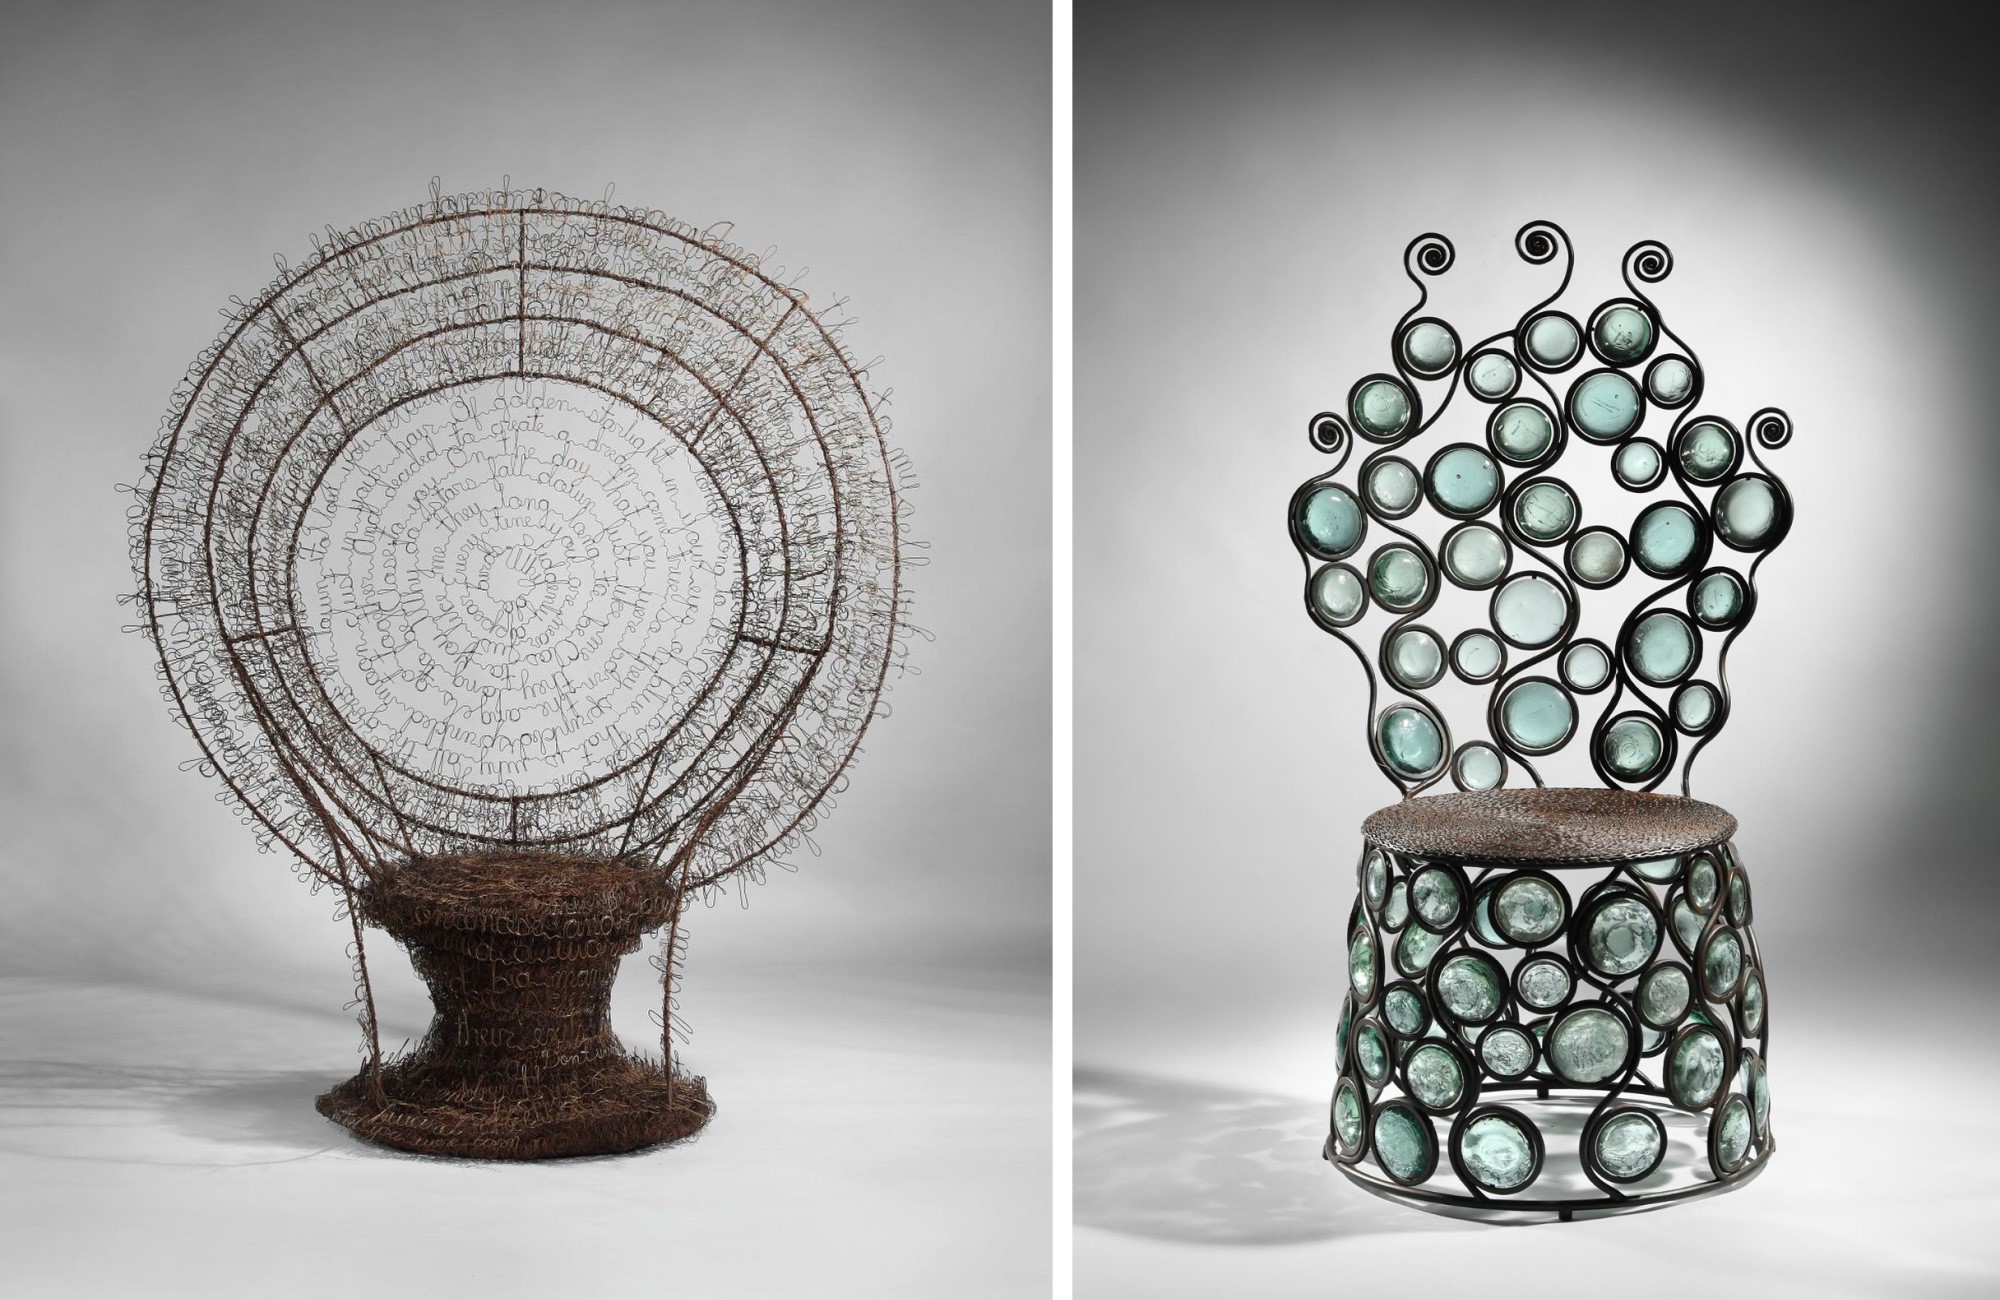 Two standout Peacock Chairs from the ICON exhibit